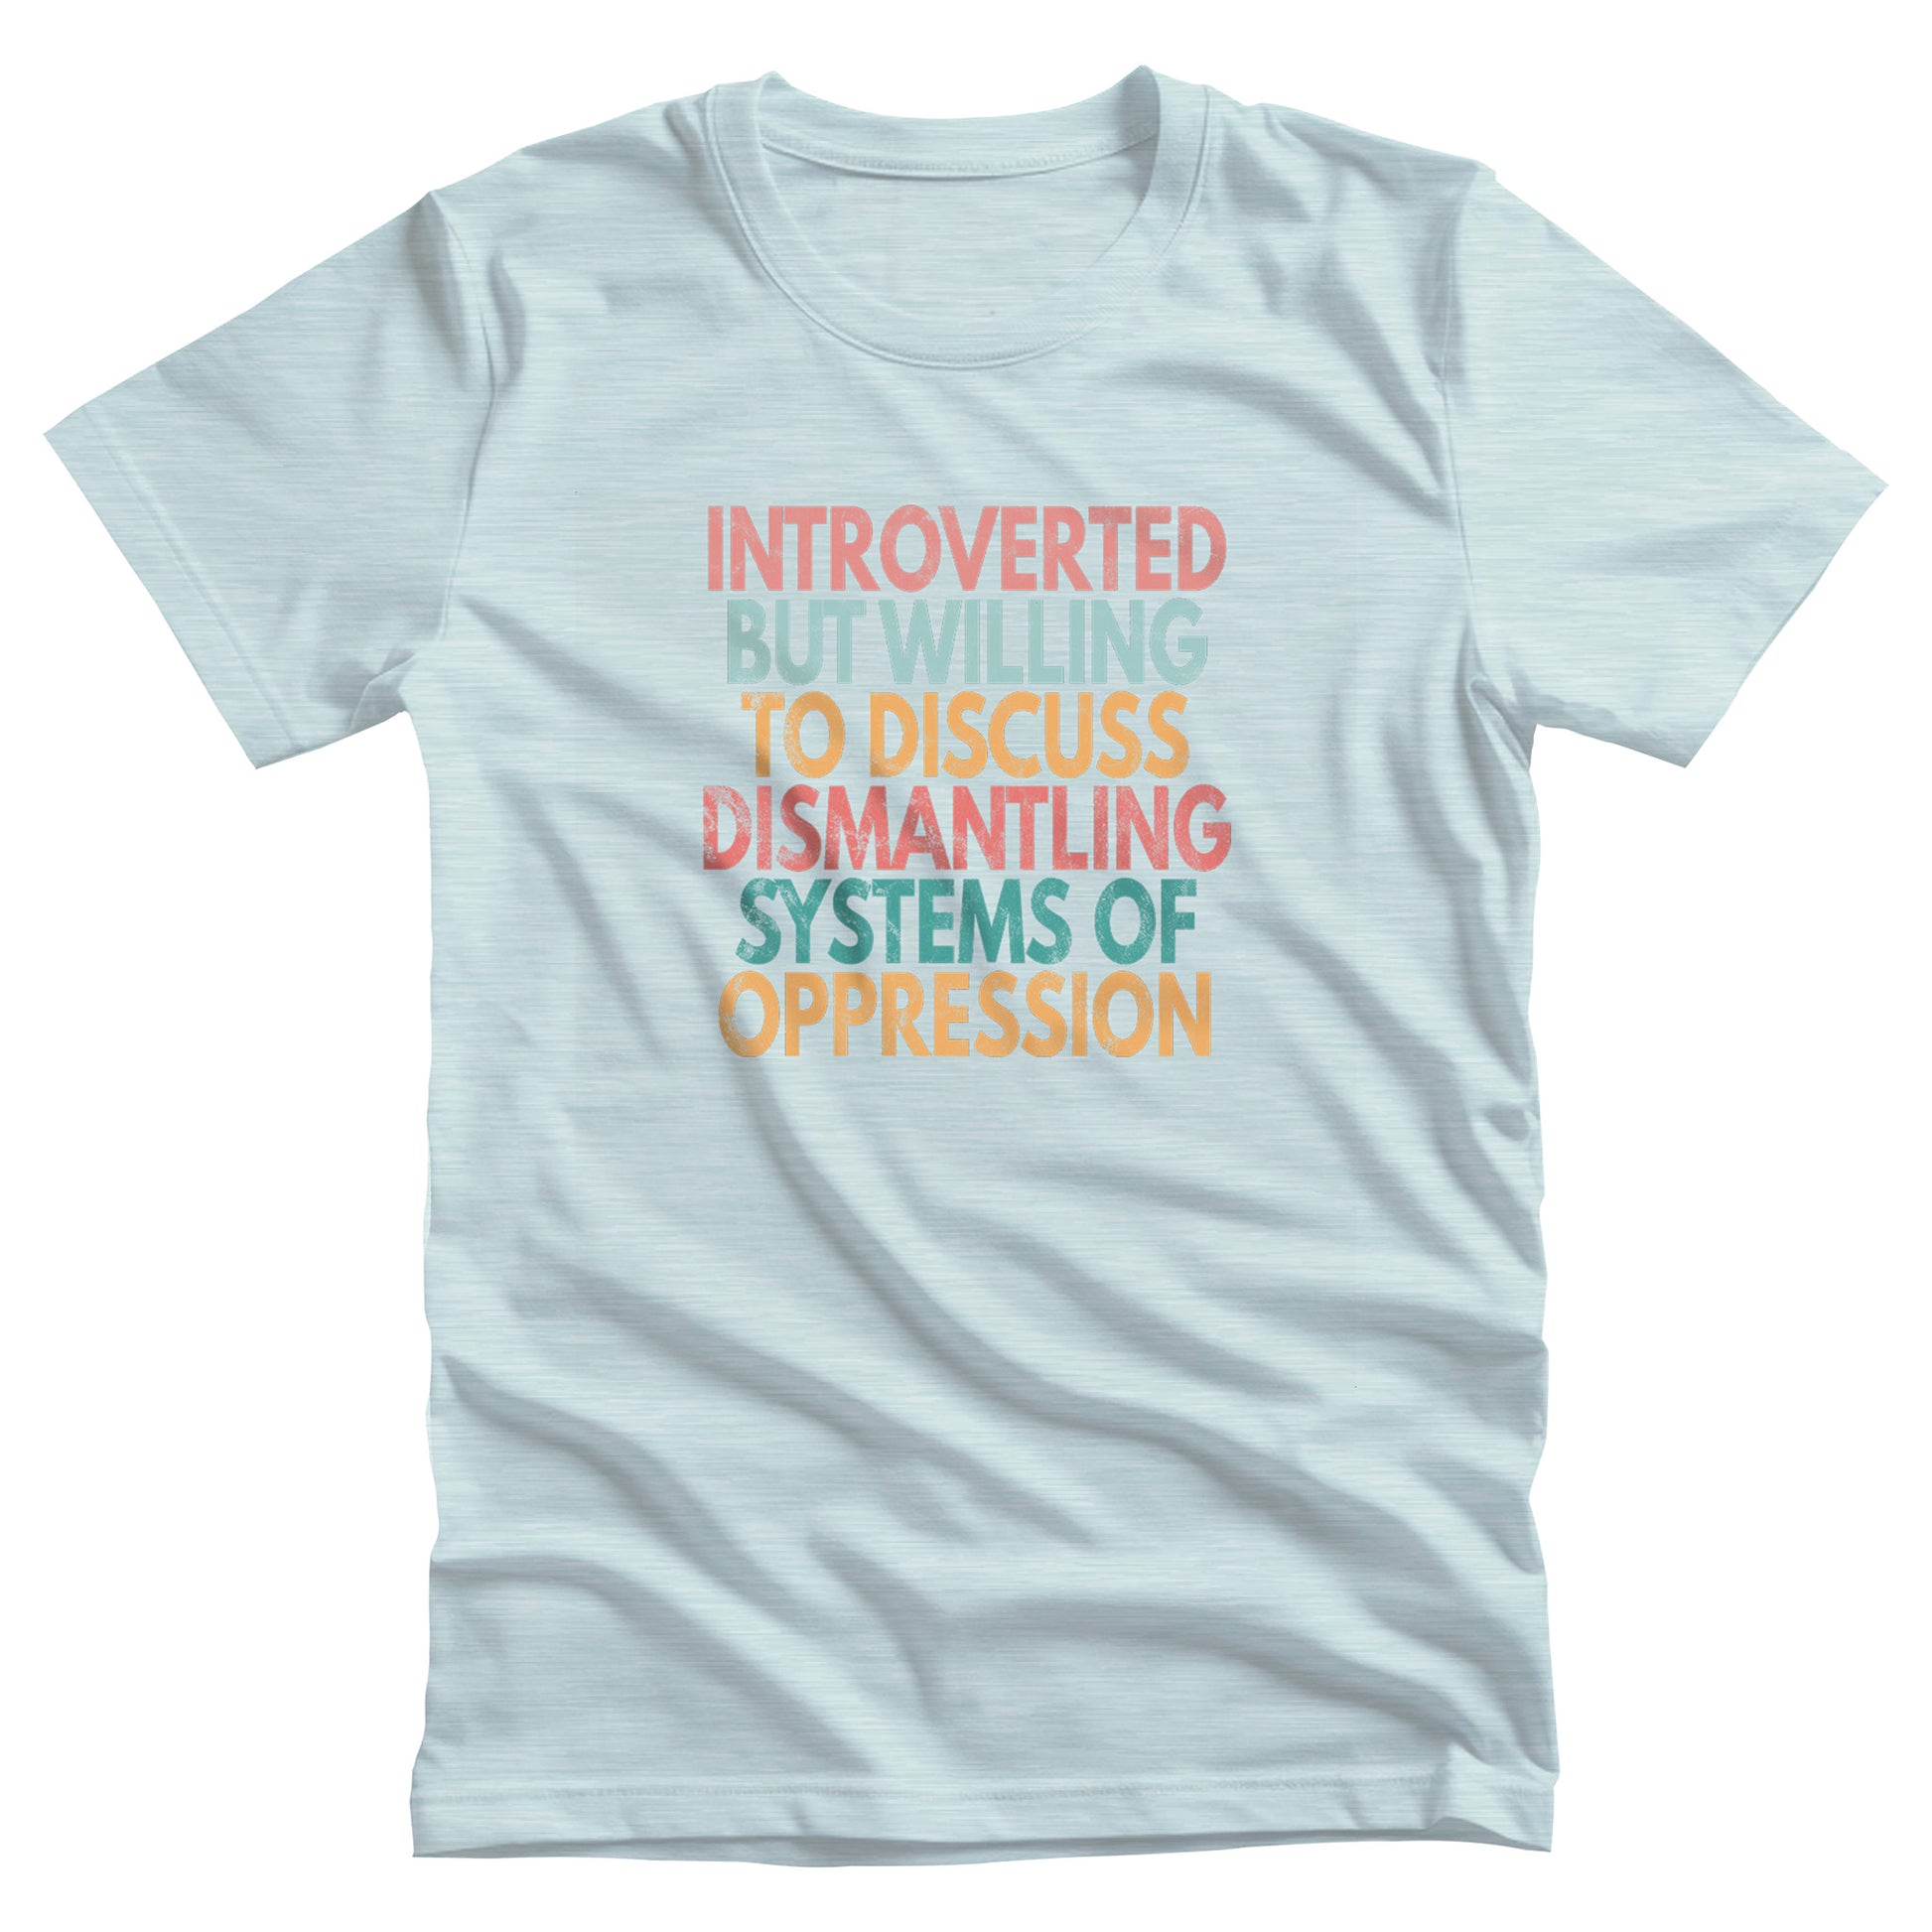 Heather Ice Blue color unisex t-shirt that says, “Introverted But Willing to Discuss Dismantling Systems of Oppression” spread out in 6 rows with each row a different color. “Introverted” is red/dark pink, “But Willing” is blue-green, “To Discuss” is yellow/orange, “Dismantling” is red/dark pink, “Systems of” is a dark blue-green, and “Oppression” is yellow/orange. The text has a slightly distressed look.